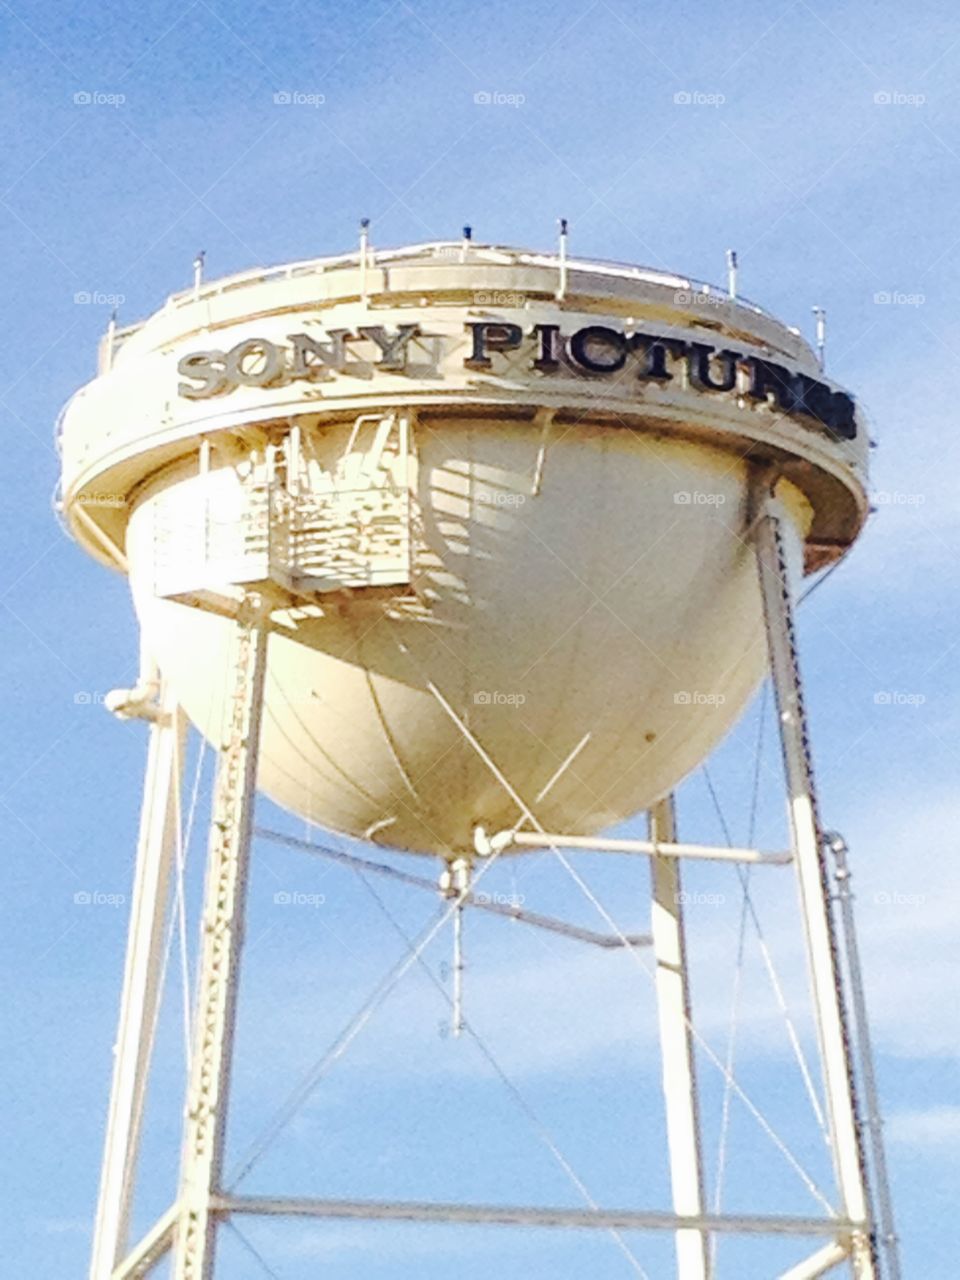 Sony water tower